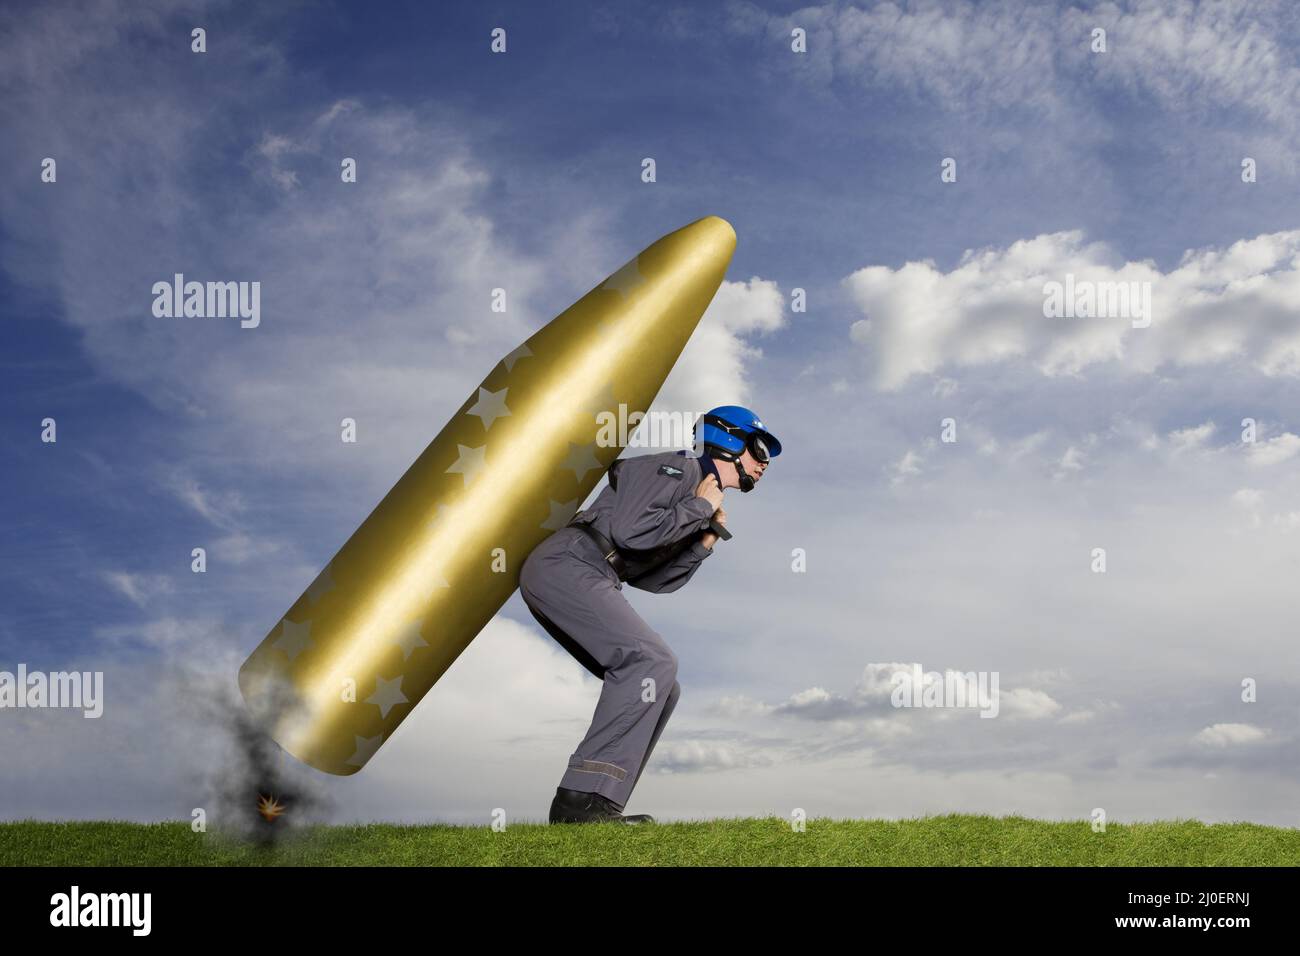 Stuntman with large rocket strapped to his back ready for take off Stock Photo